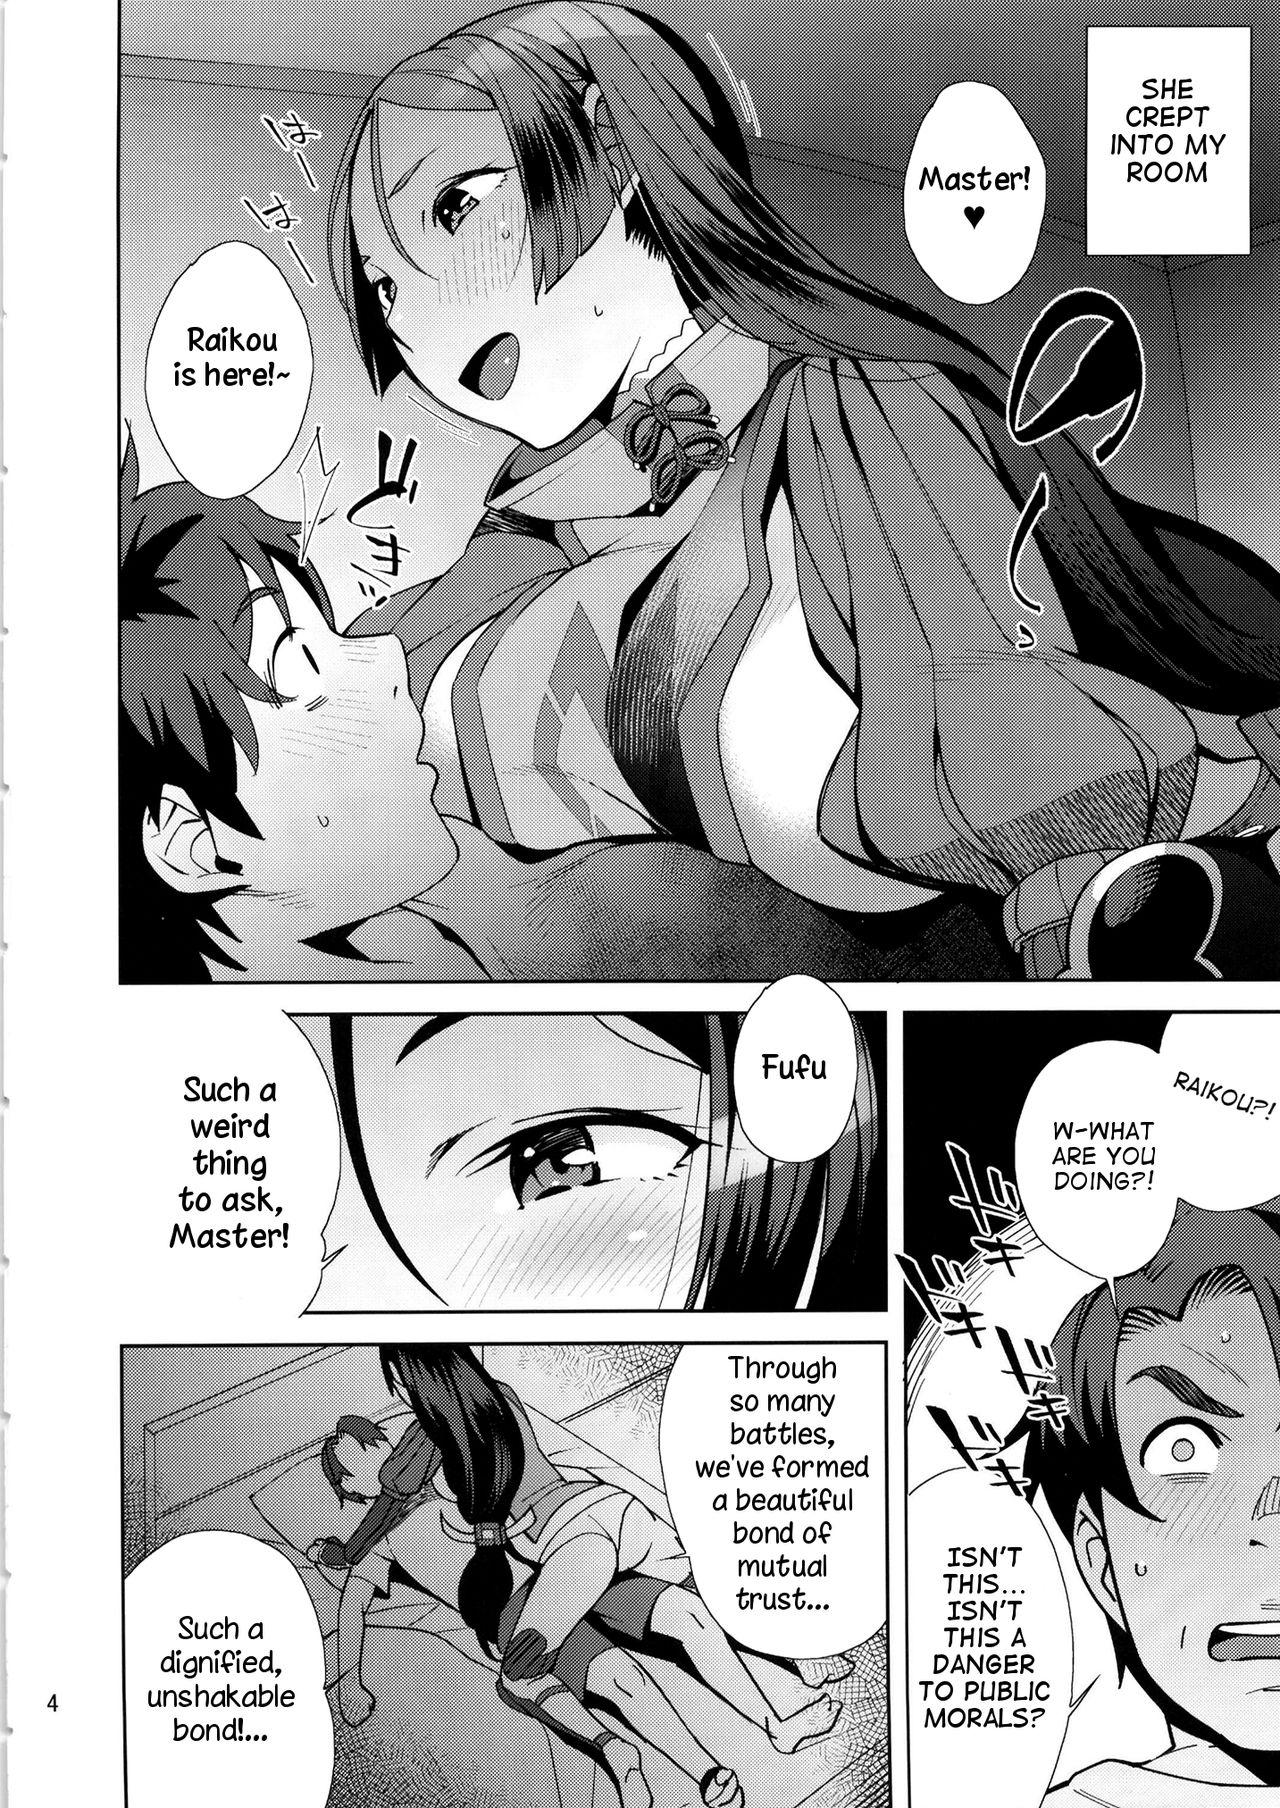 Russia Raikou Sentimental - Fate grand order Point Of View - Page 3